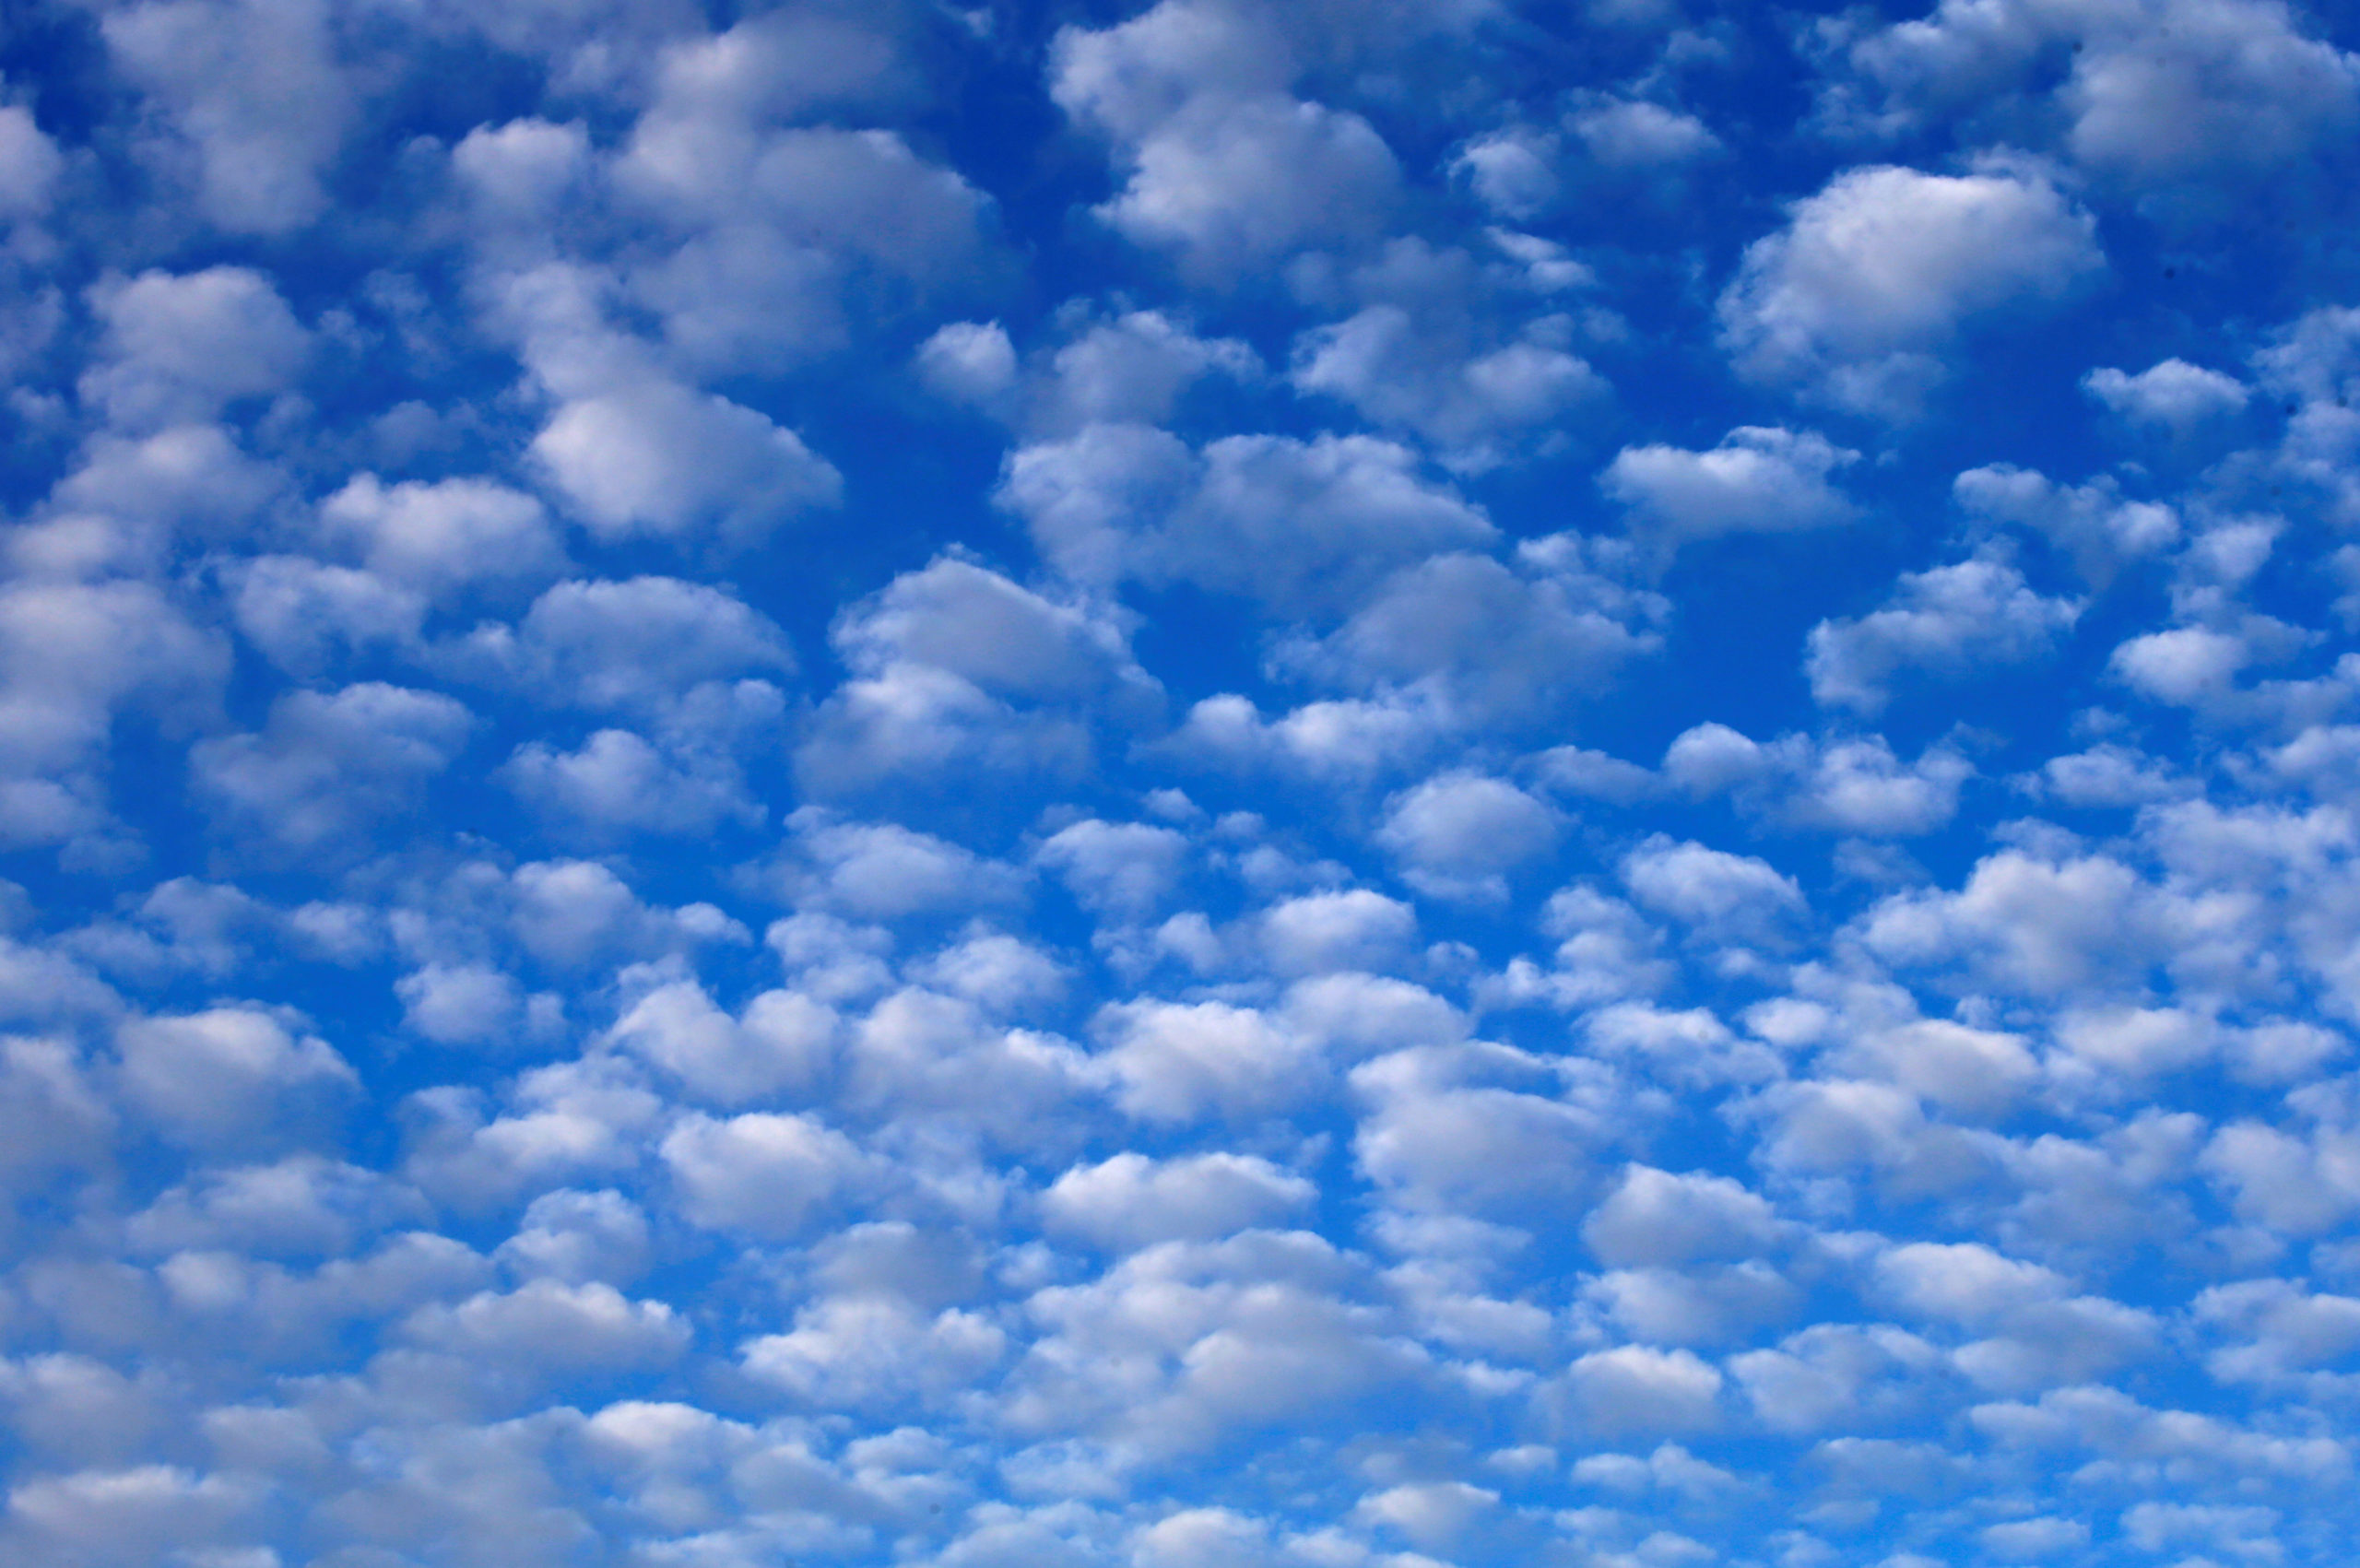 The Sky’s the Limit for Cloud-Based Business Management